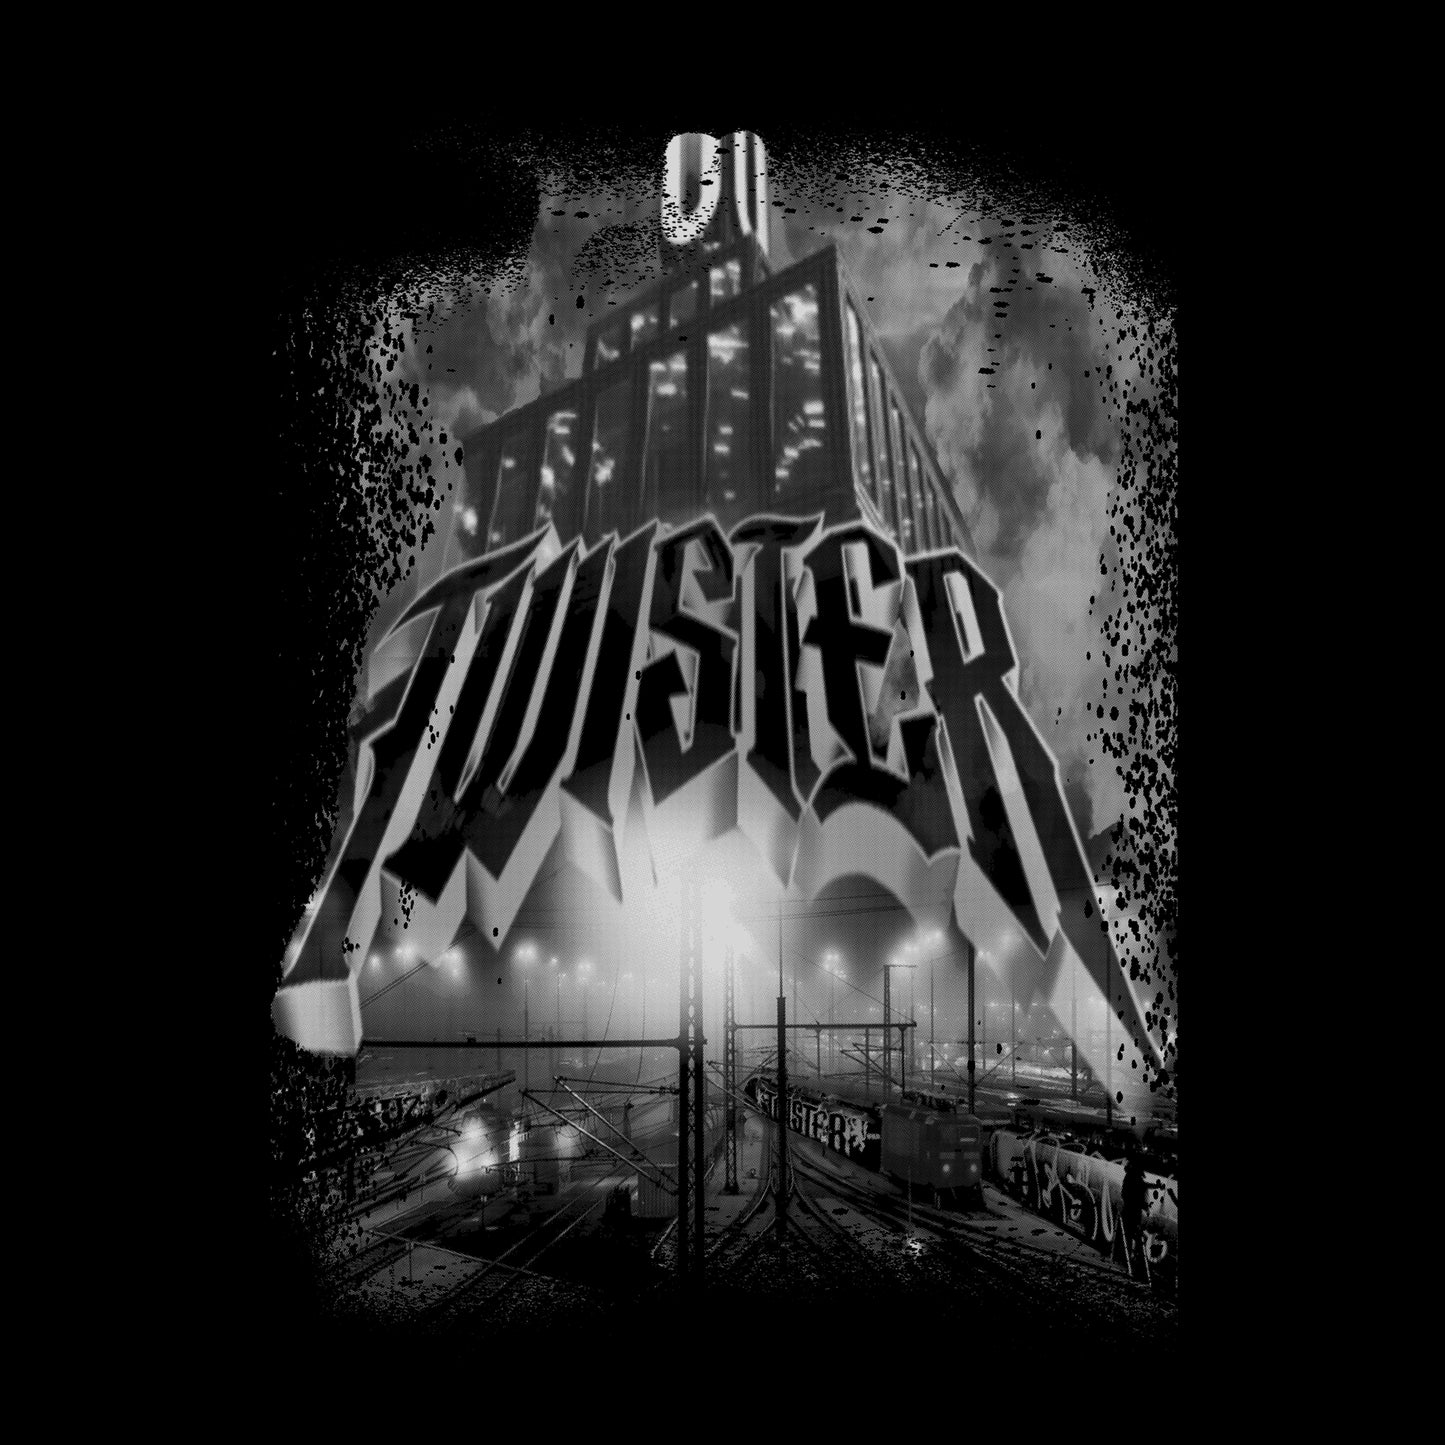 T-Shirt by "TWISTER"